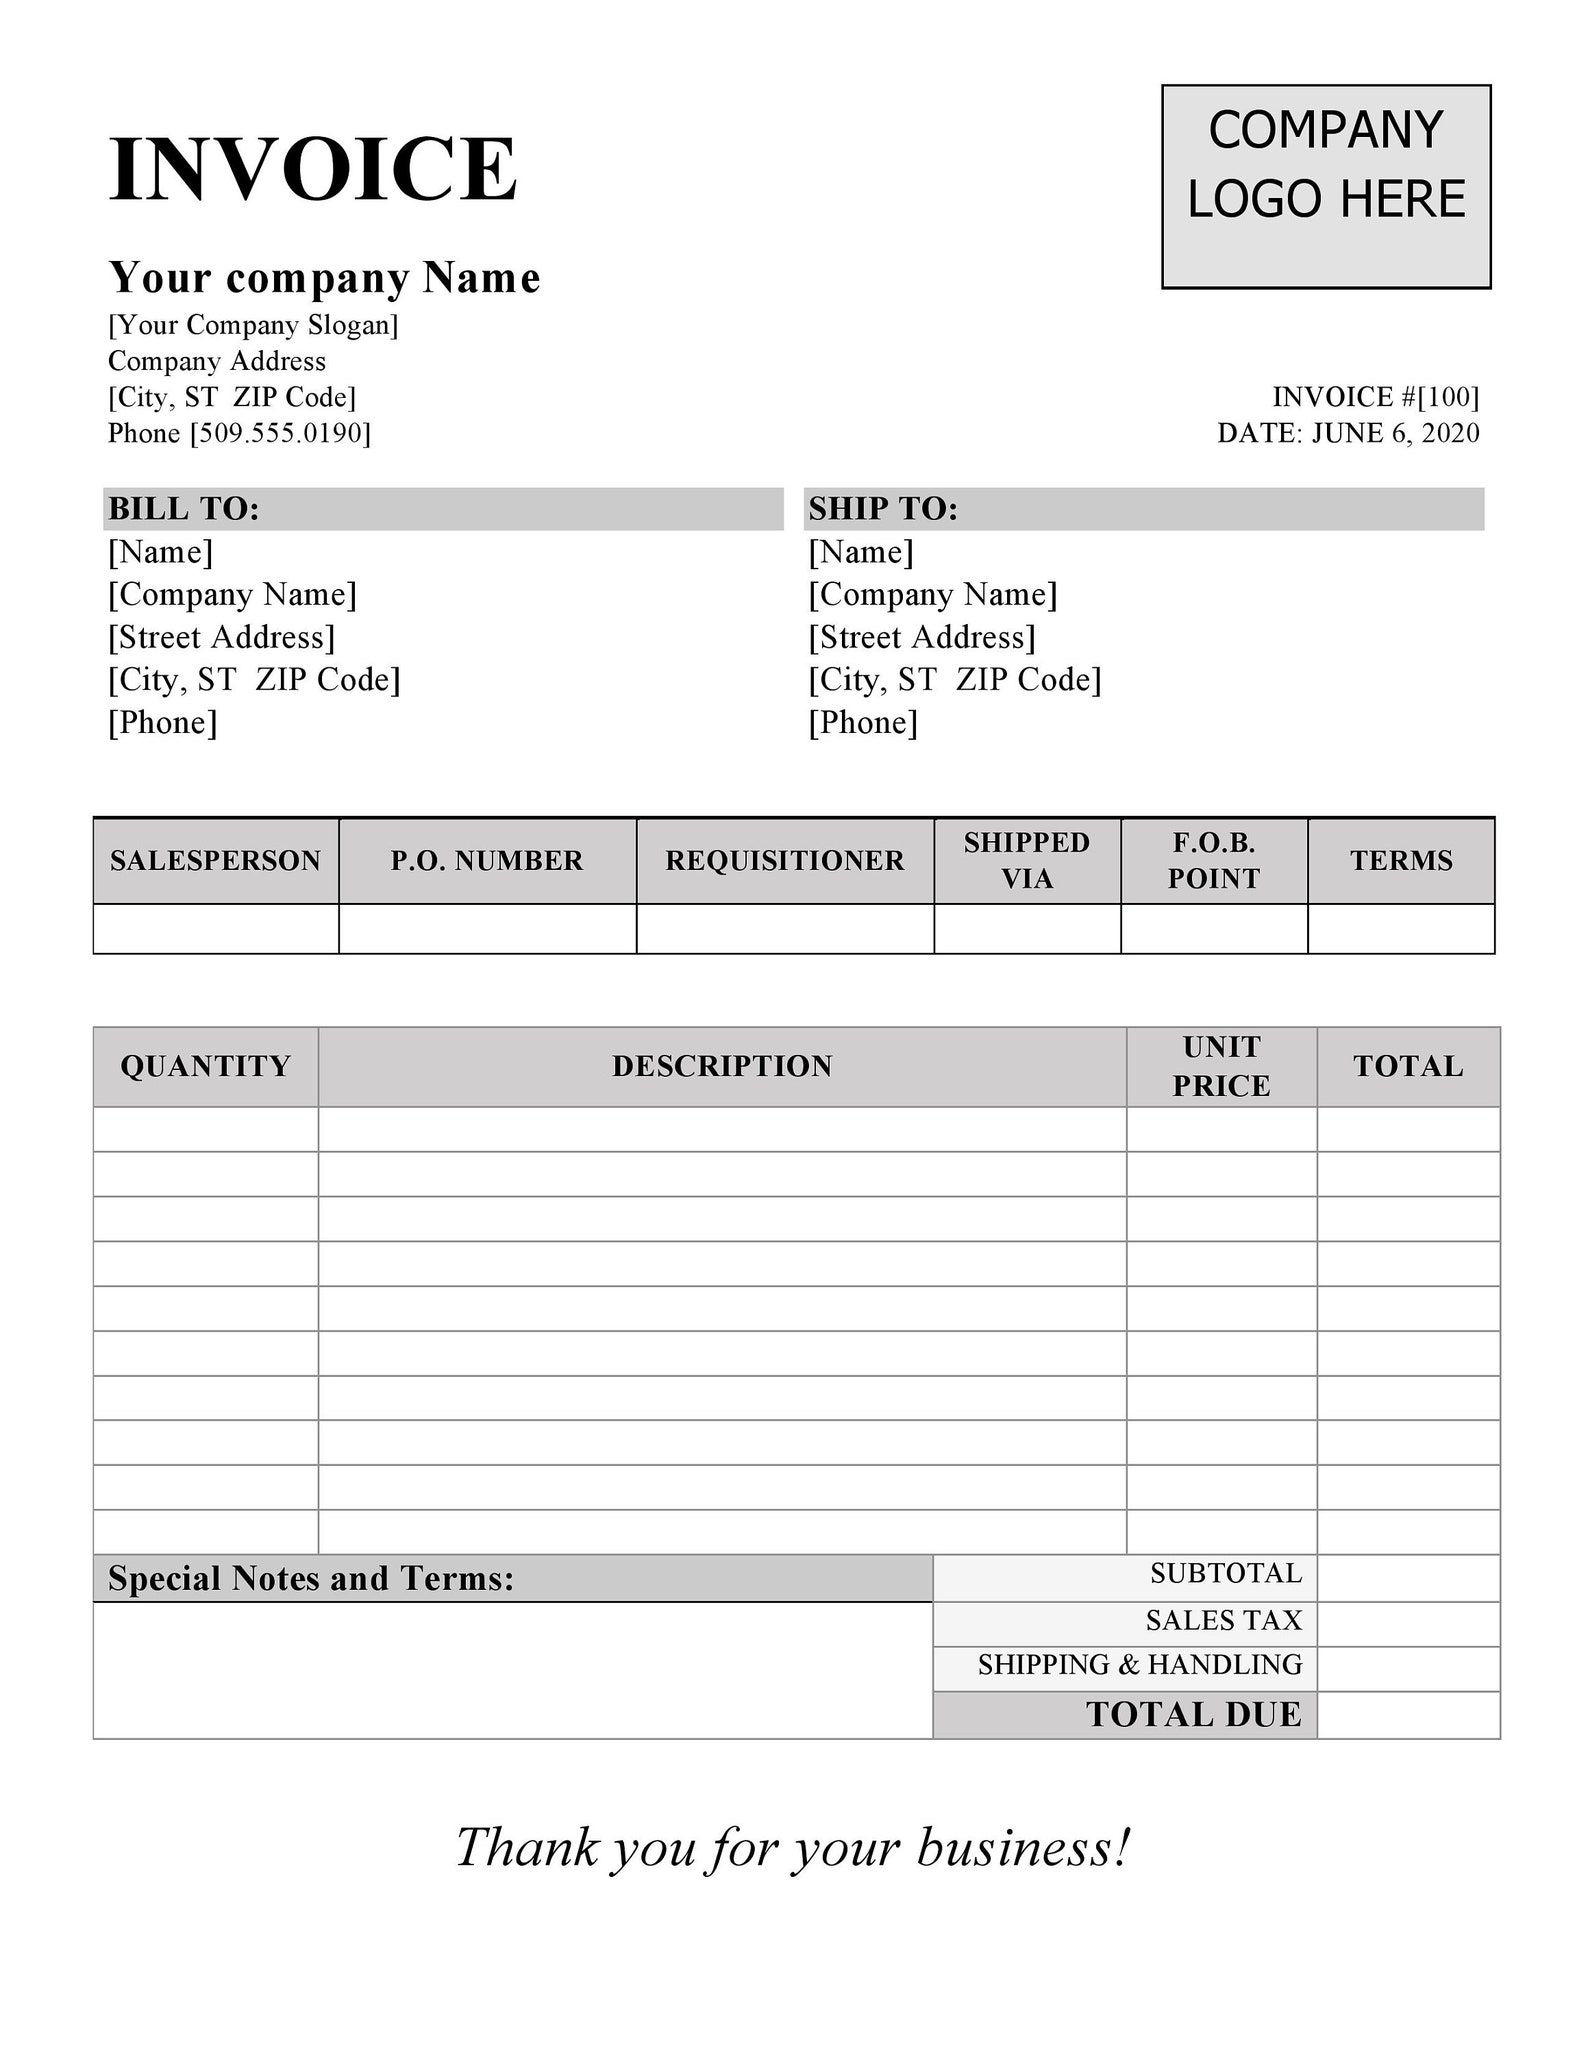 Invoice Template Printable Invoice Business Form Etsy